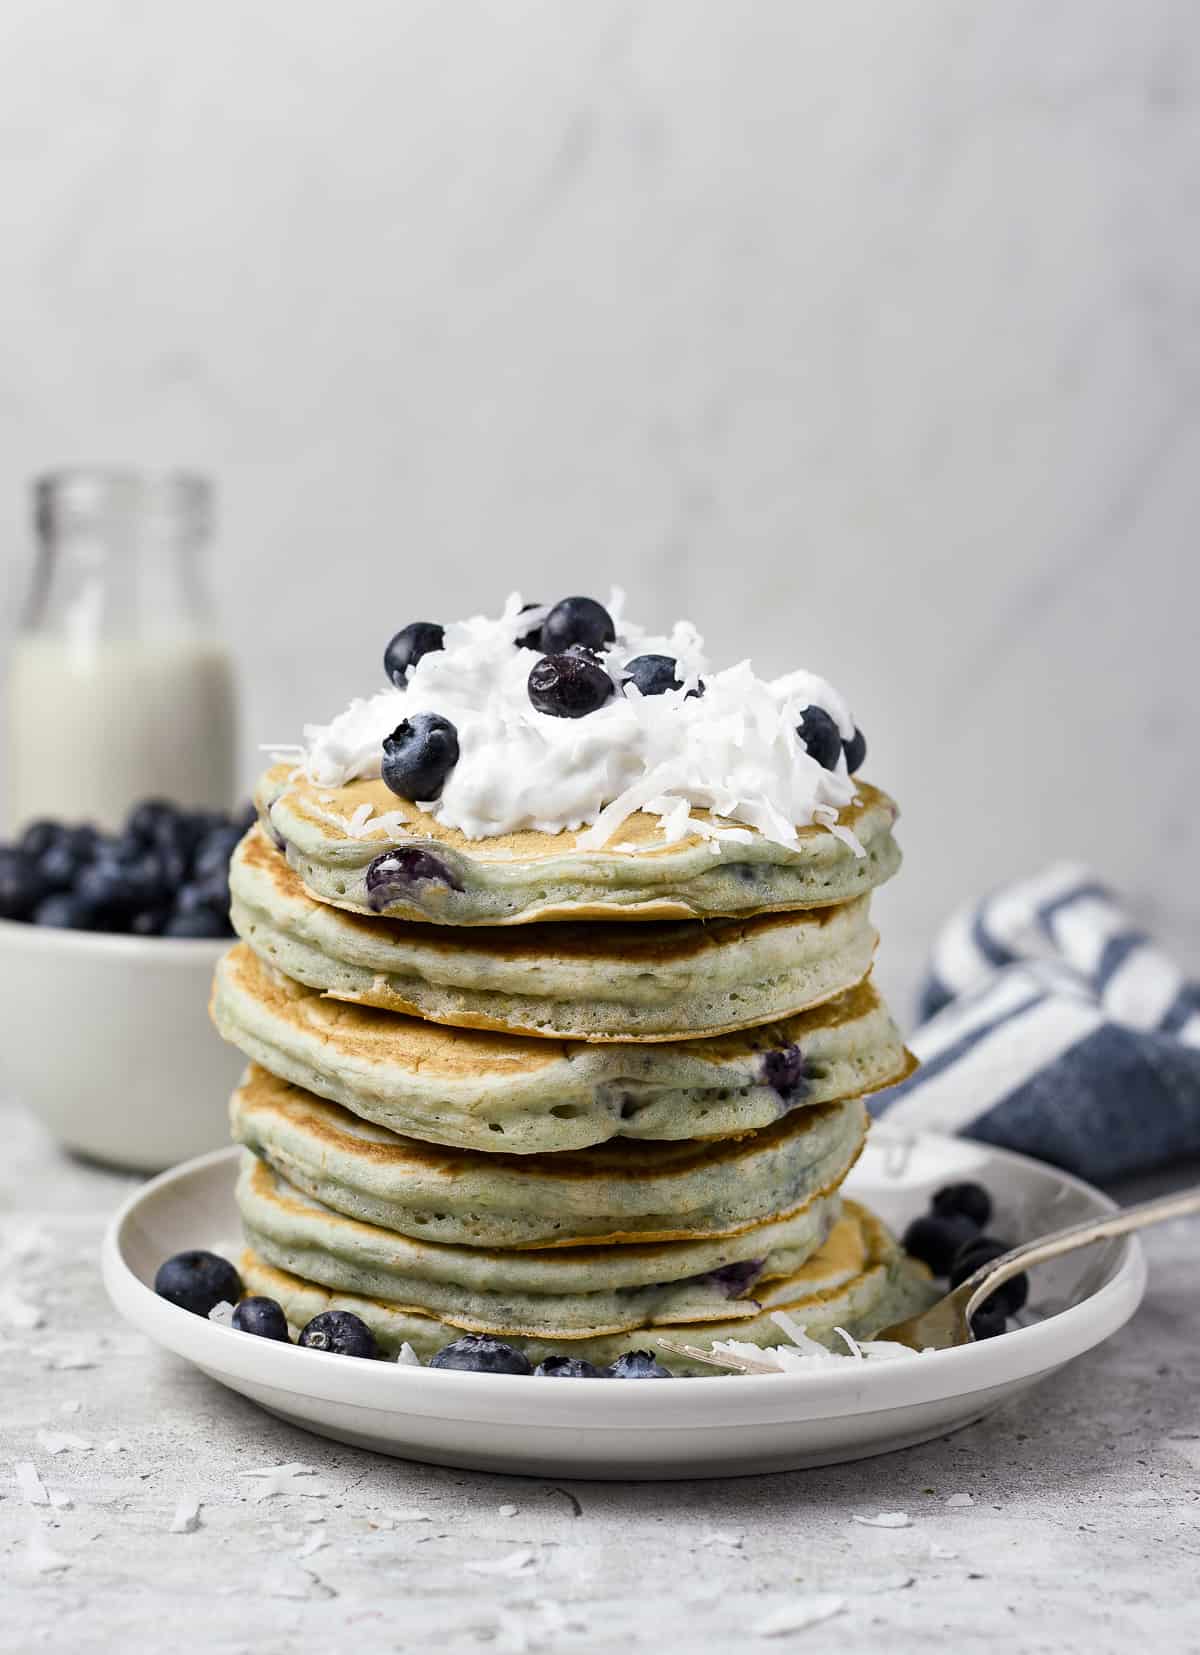 Stack of pancakes with whipped cream and blueberries.